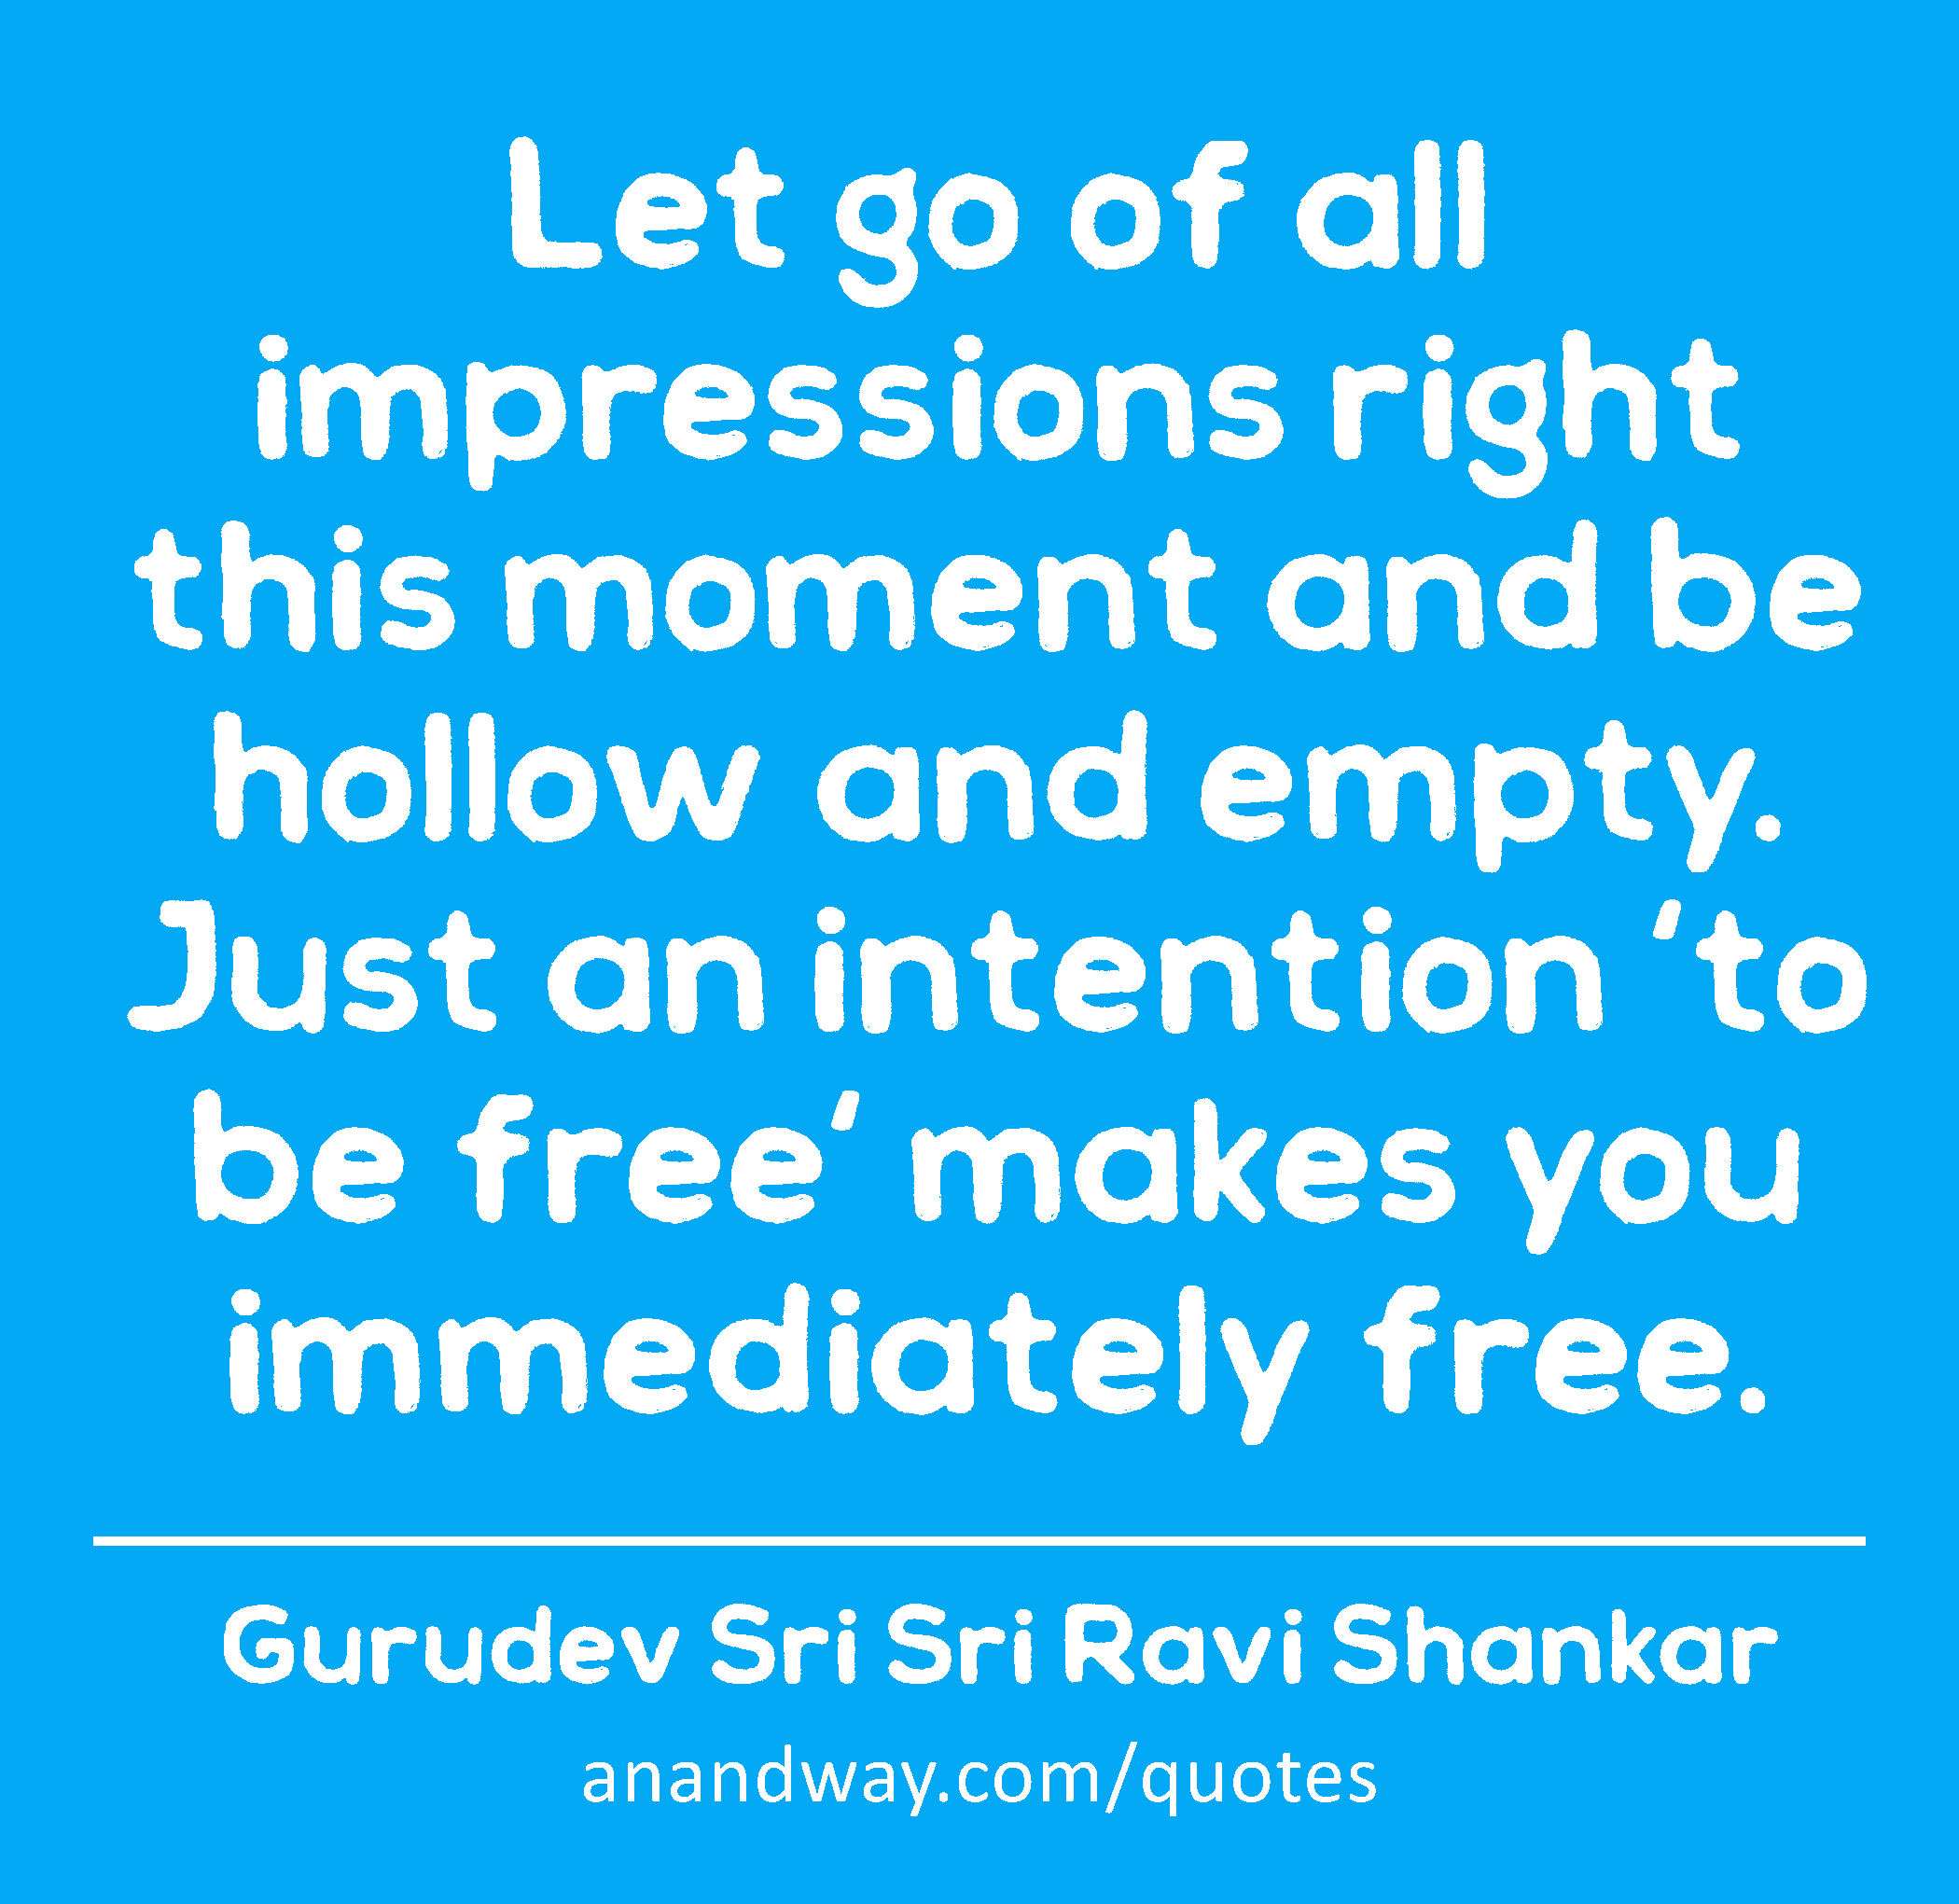 Let go of all impressions right this moment and be hollow and empty. Just an intention 'to be free'
 -Gurudev Sri Sri Ravi Shankar